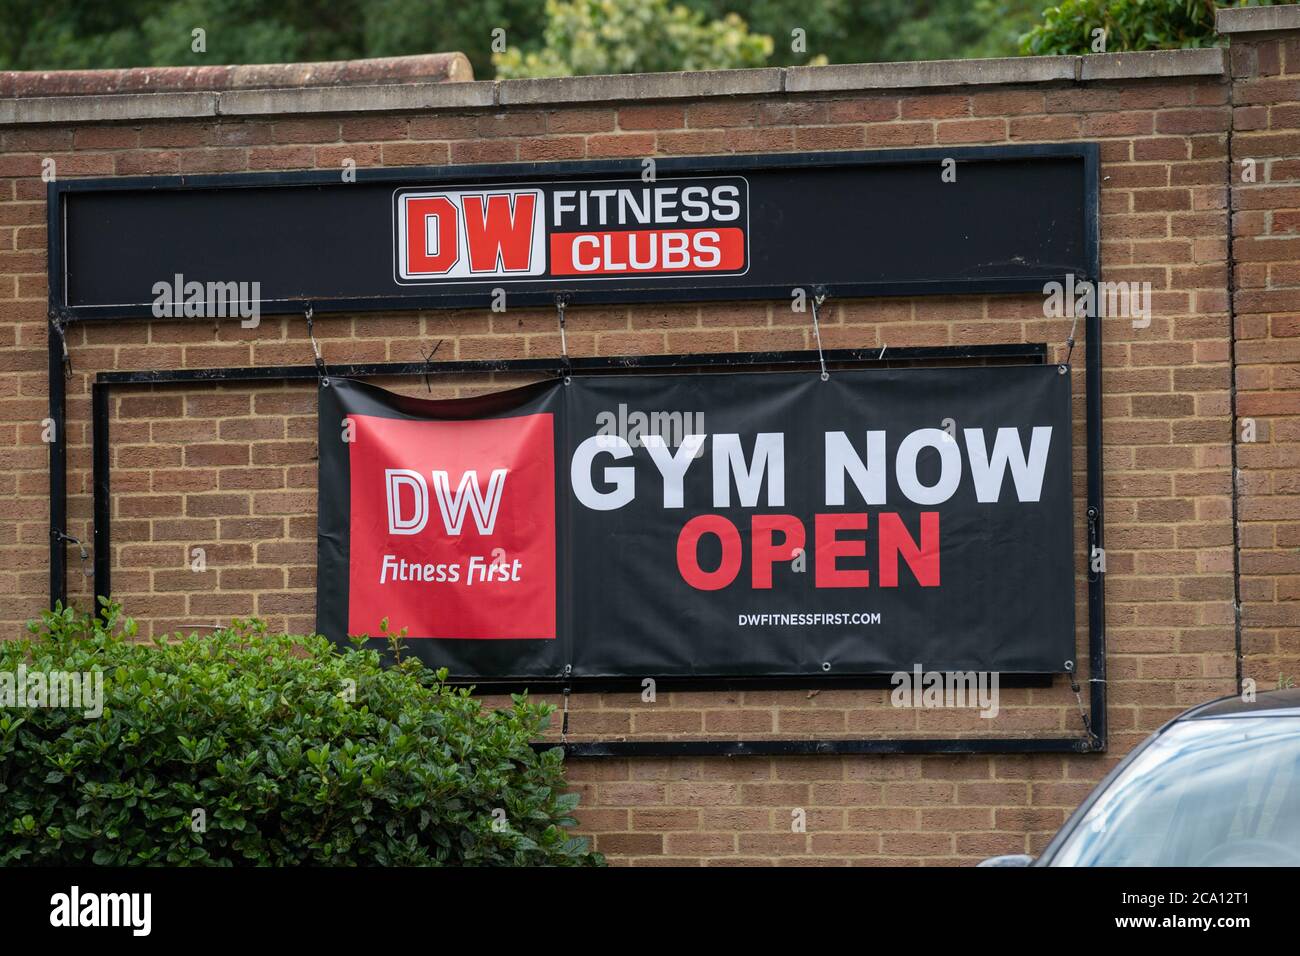 Brentwood Essex 3rd August 2020 The Brentwood DW Fitness Club Gym is one of those under threat as the parent group DW Sports goes into liquidation with 1,700 jobs at risk. Credit: Ian Davidson/Alamy Live News Stock Photo